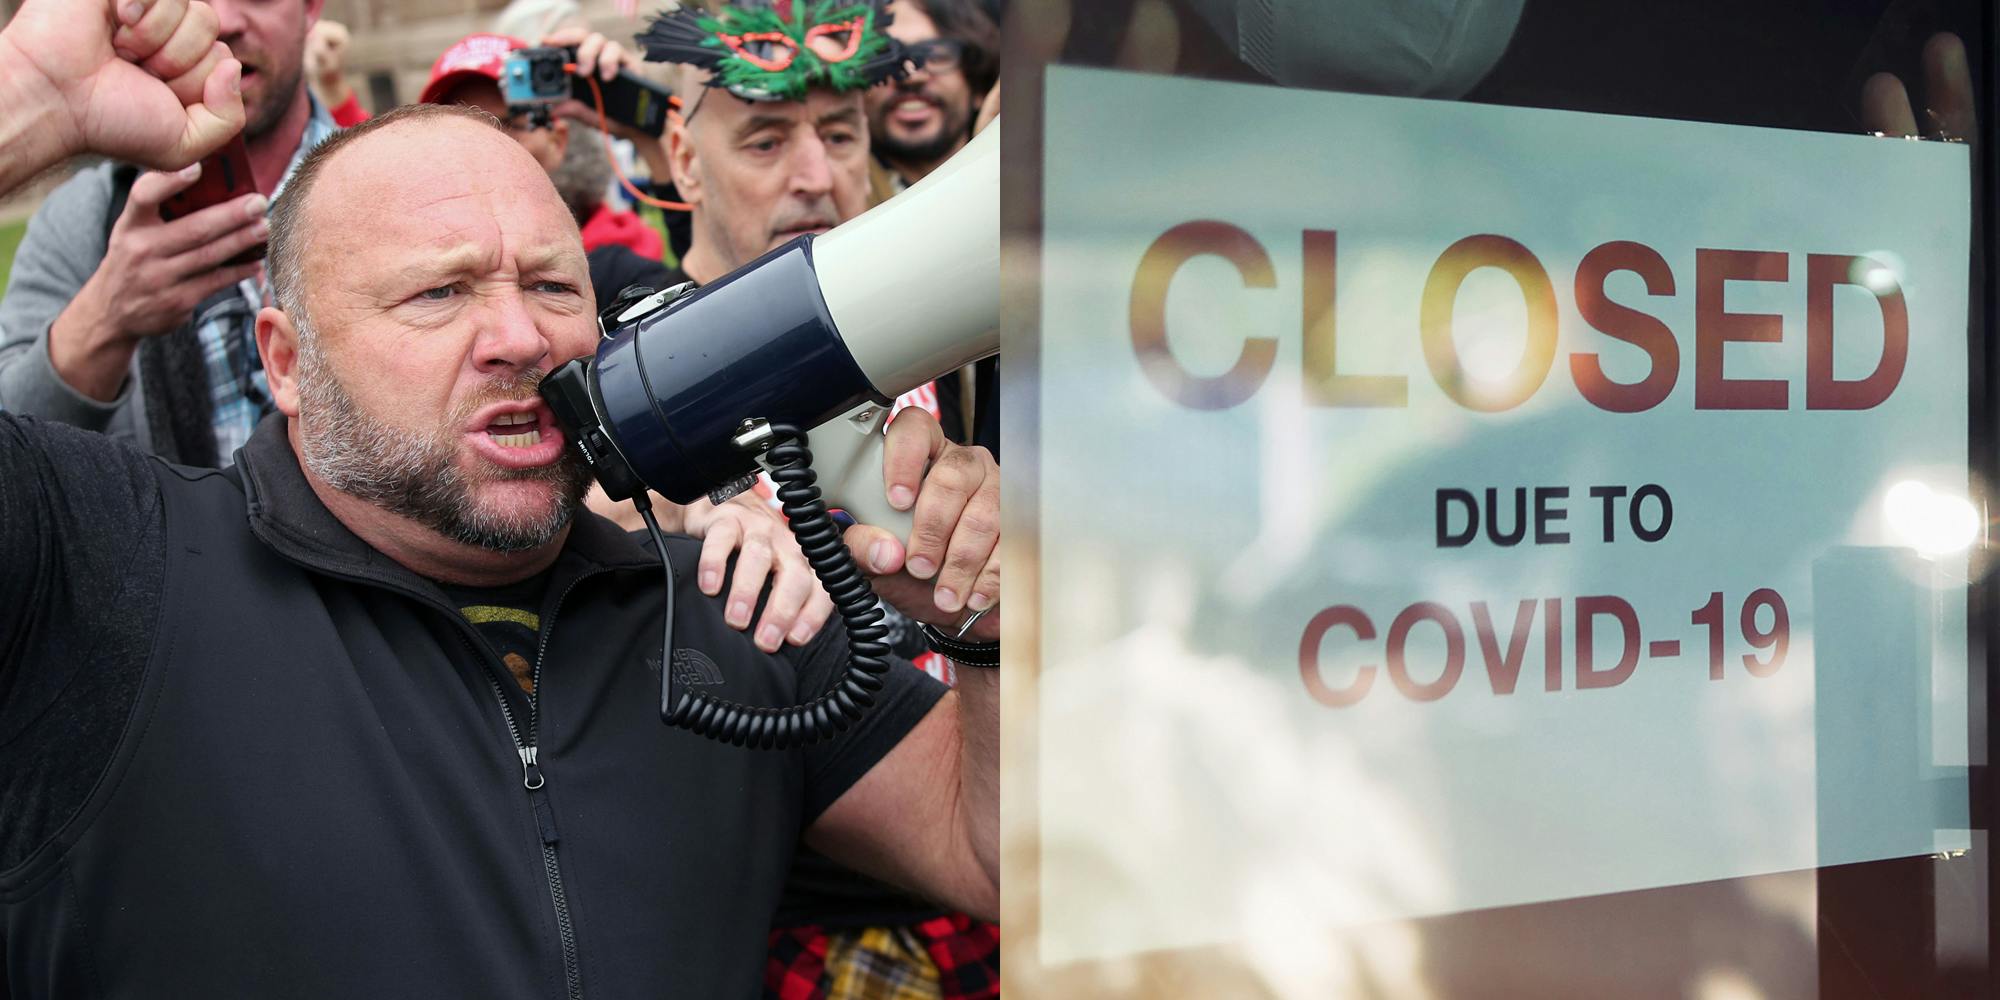 Alex Jones speaking into microphone (l) sign in glass door "CLOSED DUE TO COVID-19" (r) as fears of Lockdown 2.0 grow